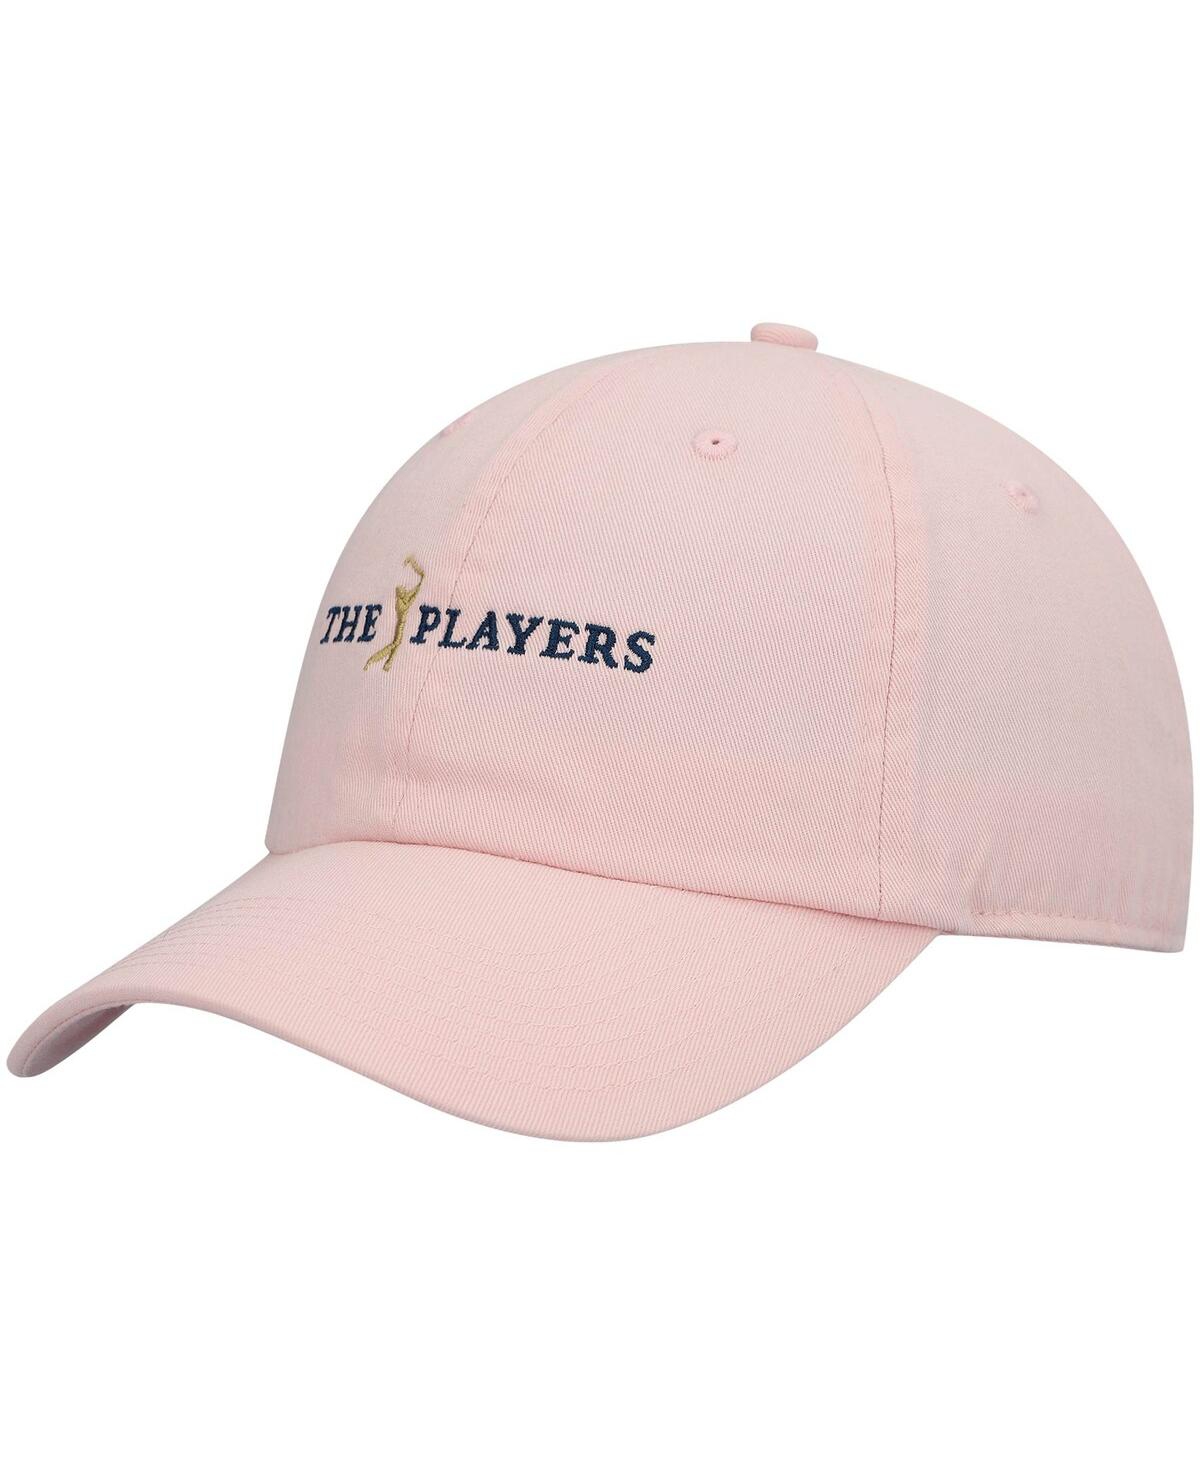 Men's Ahead Pink The Players Largo Washed Twill Adjustable Hat - Pink